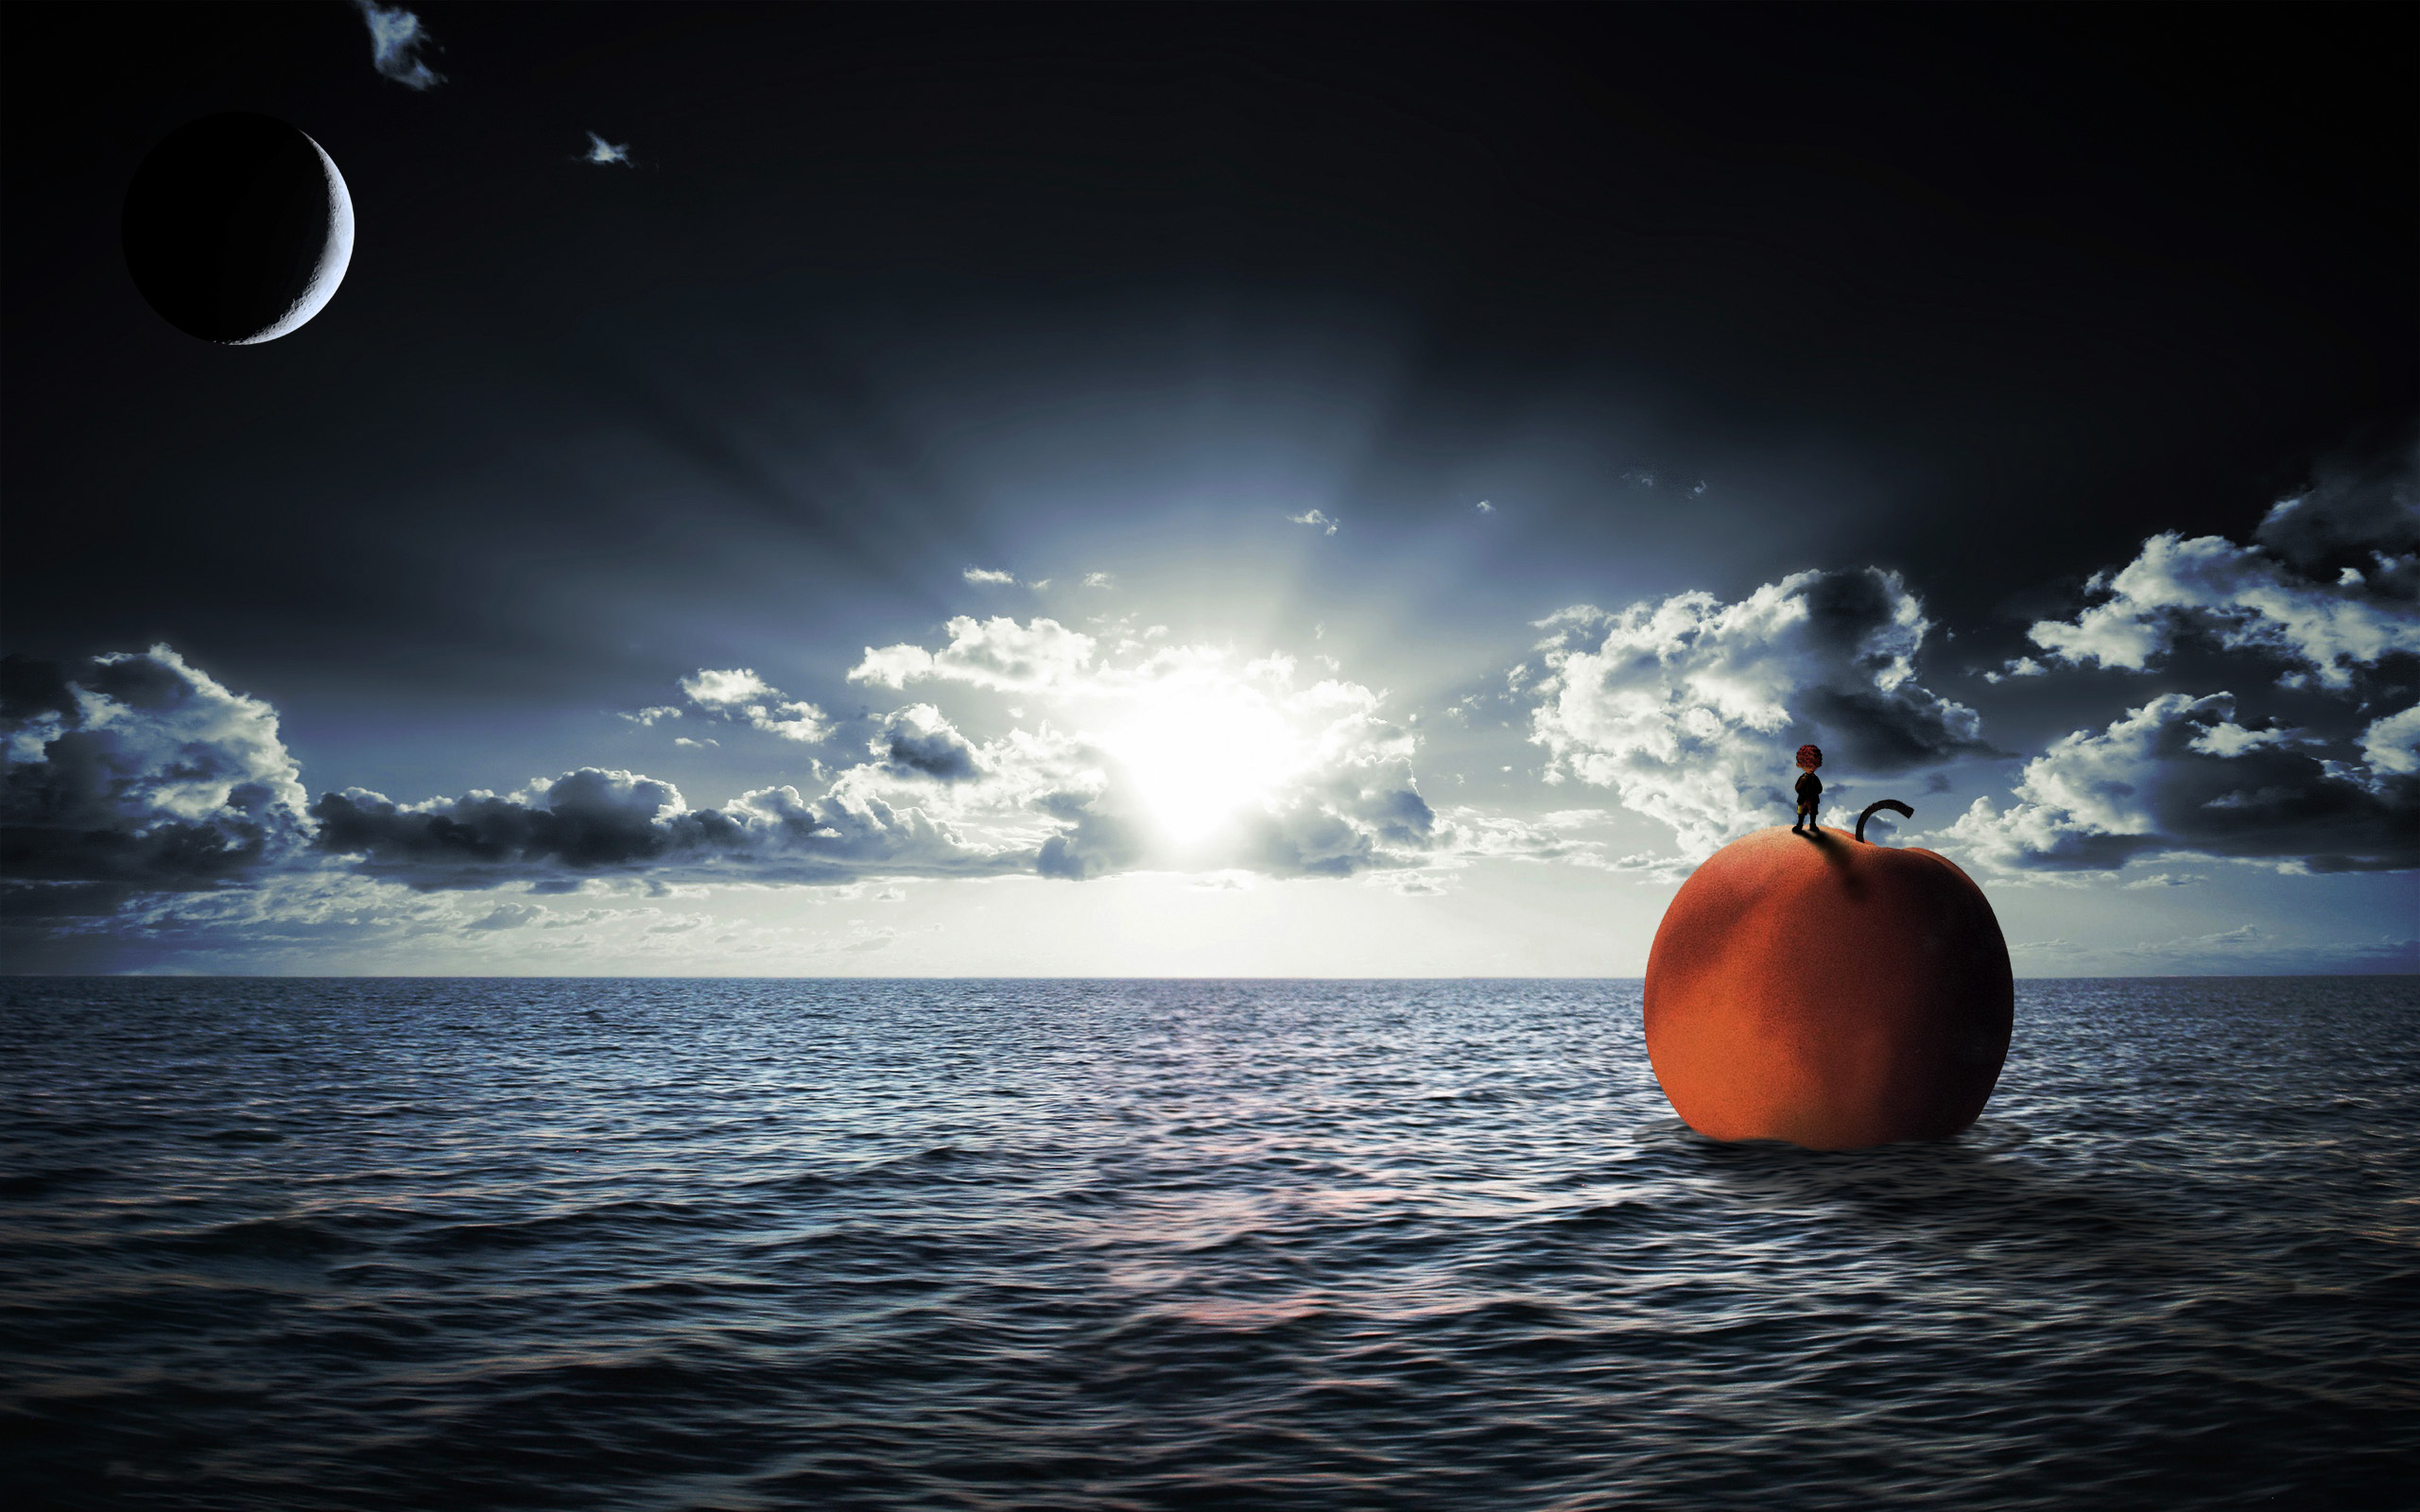 James And The Giant Peach HD wallpapers, Desktop wallpaper - most viewed